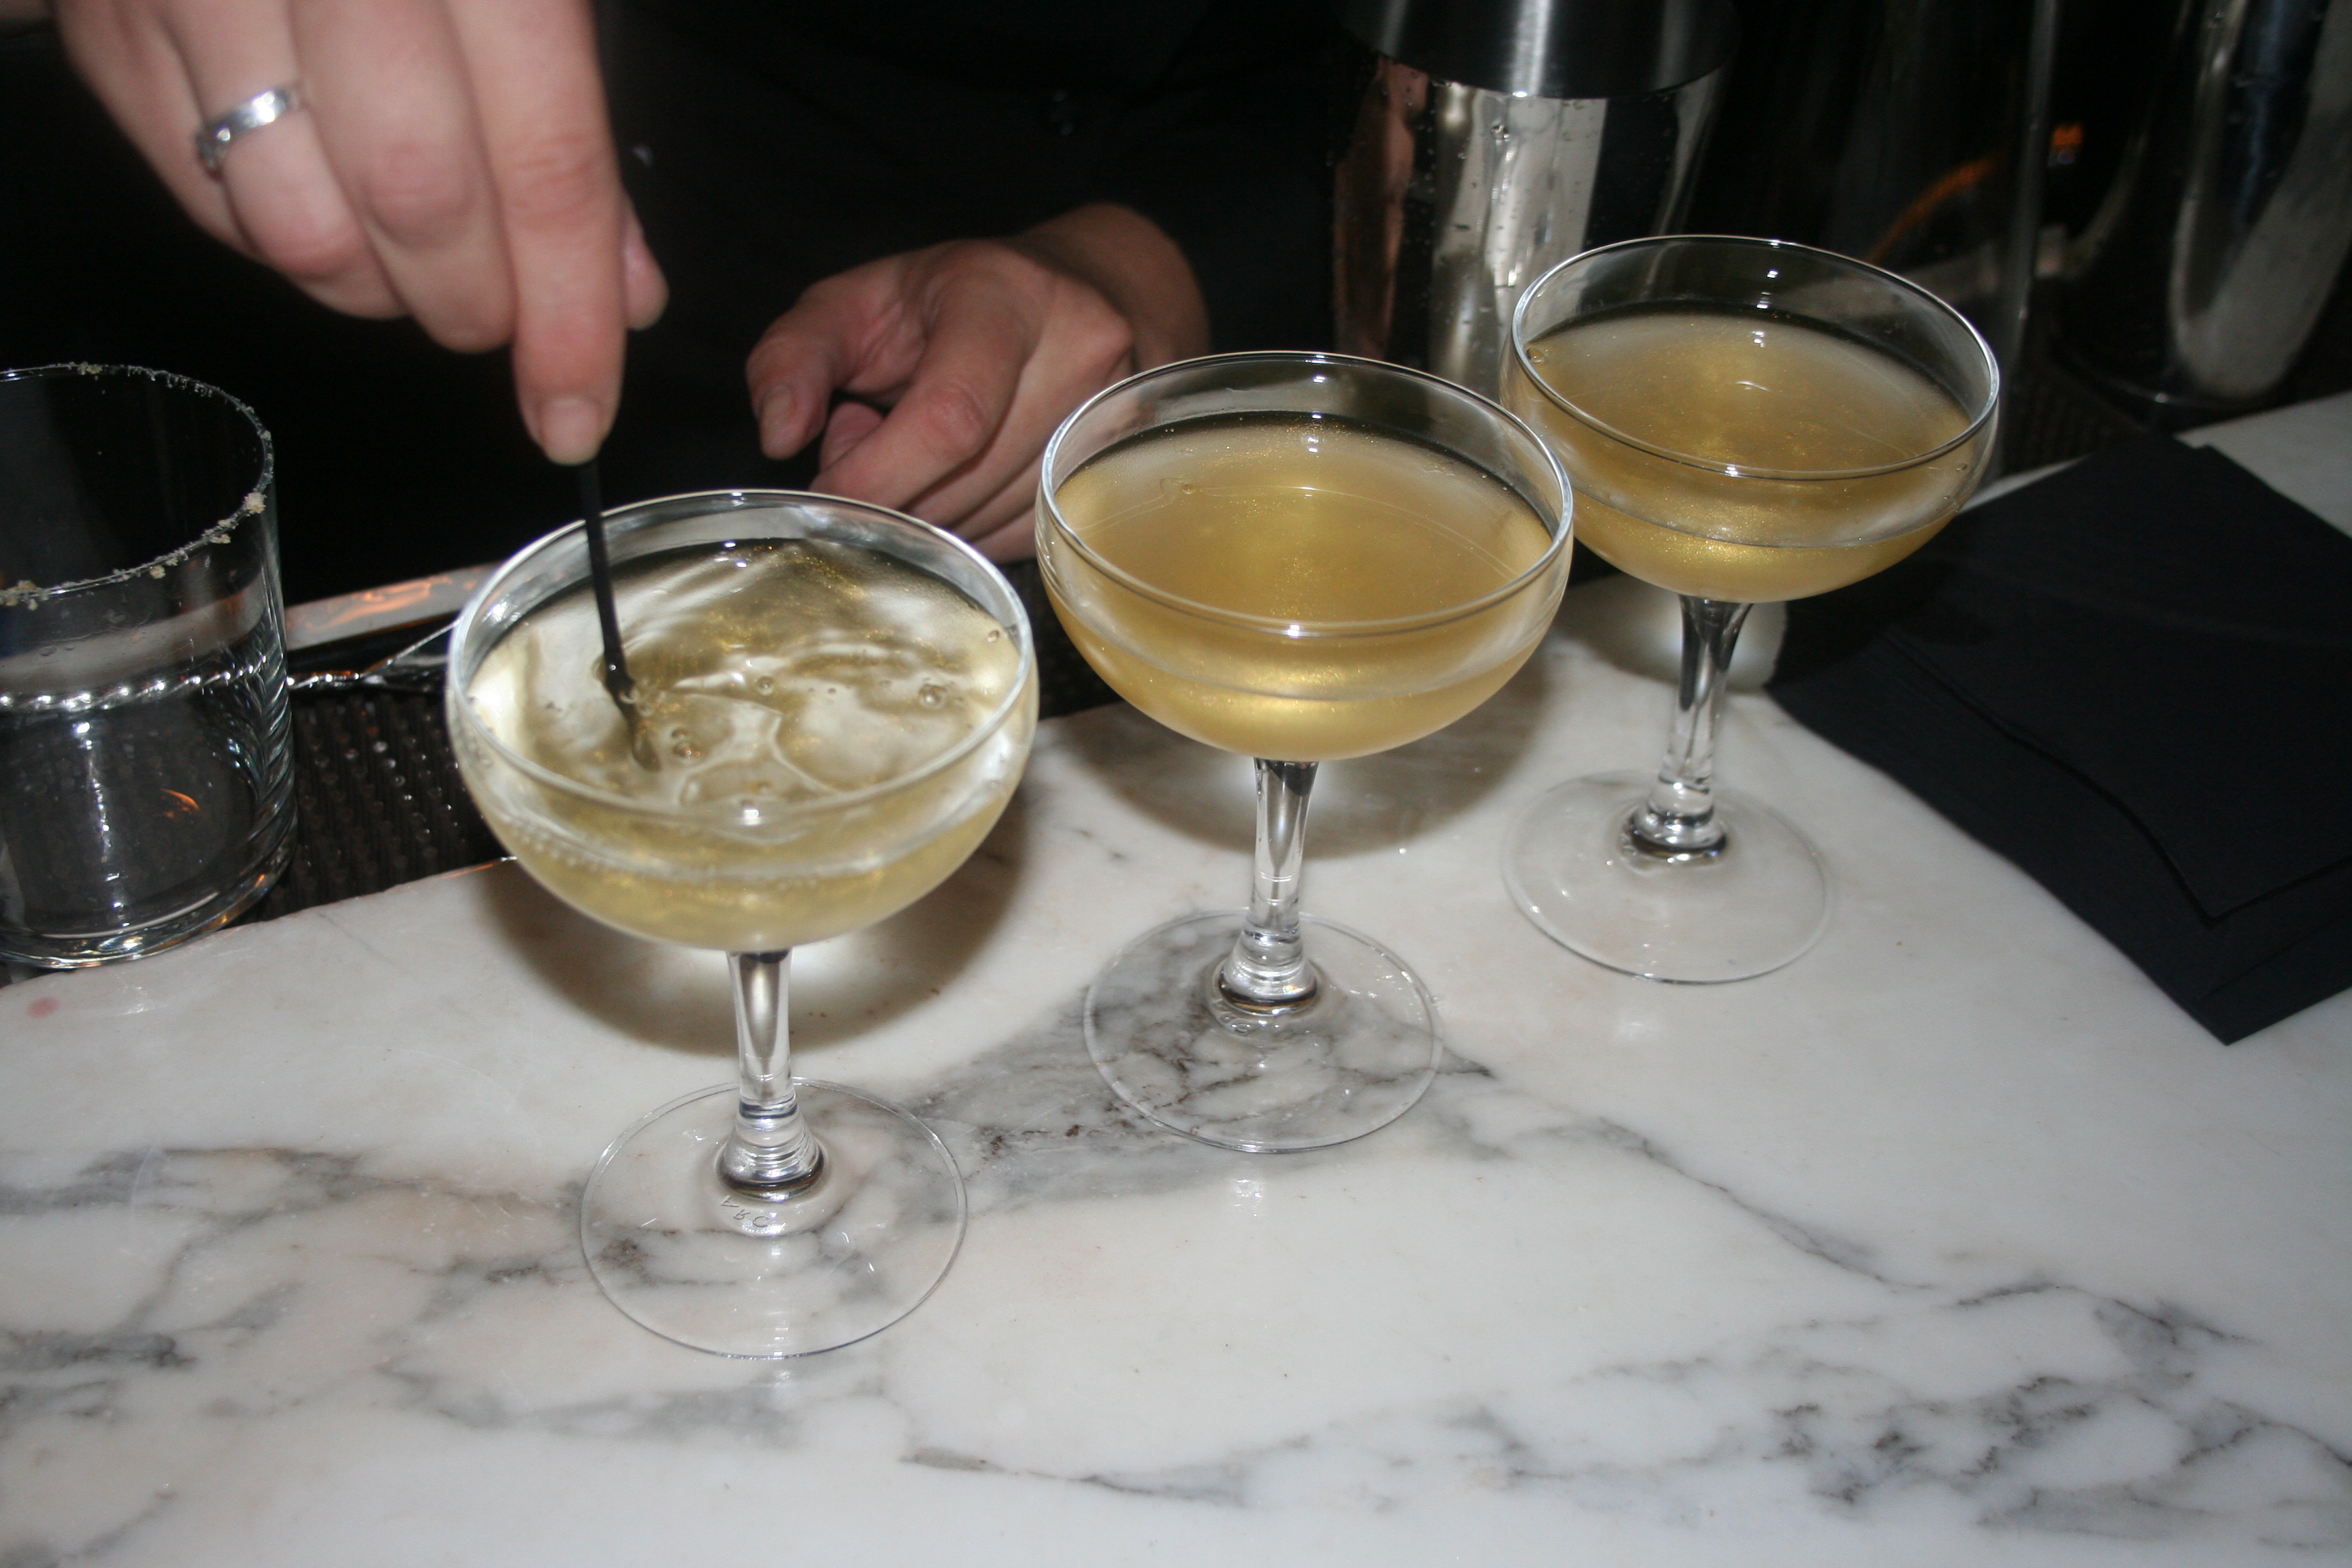 A bartender adds gold dust to the new Goldfinger martini available at both bars and the martini cart. (Mark Heckathorn/DC on Heels)